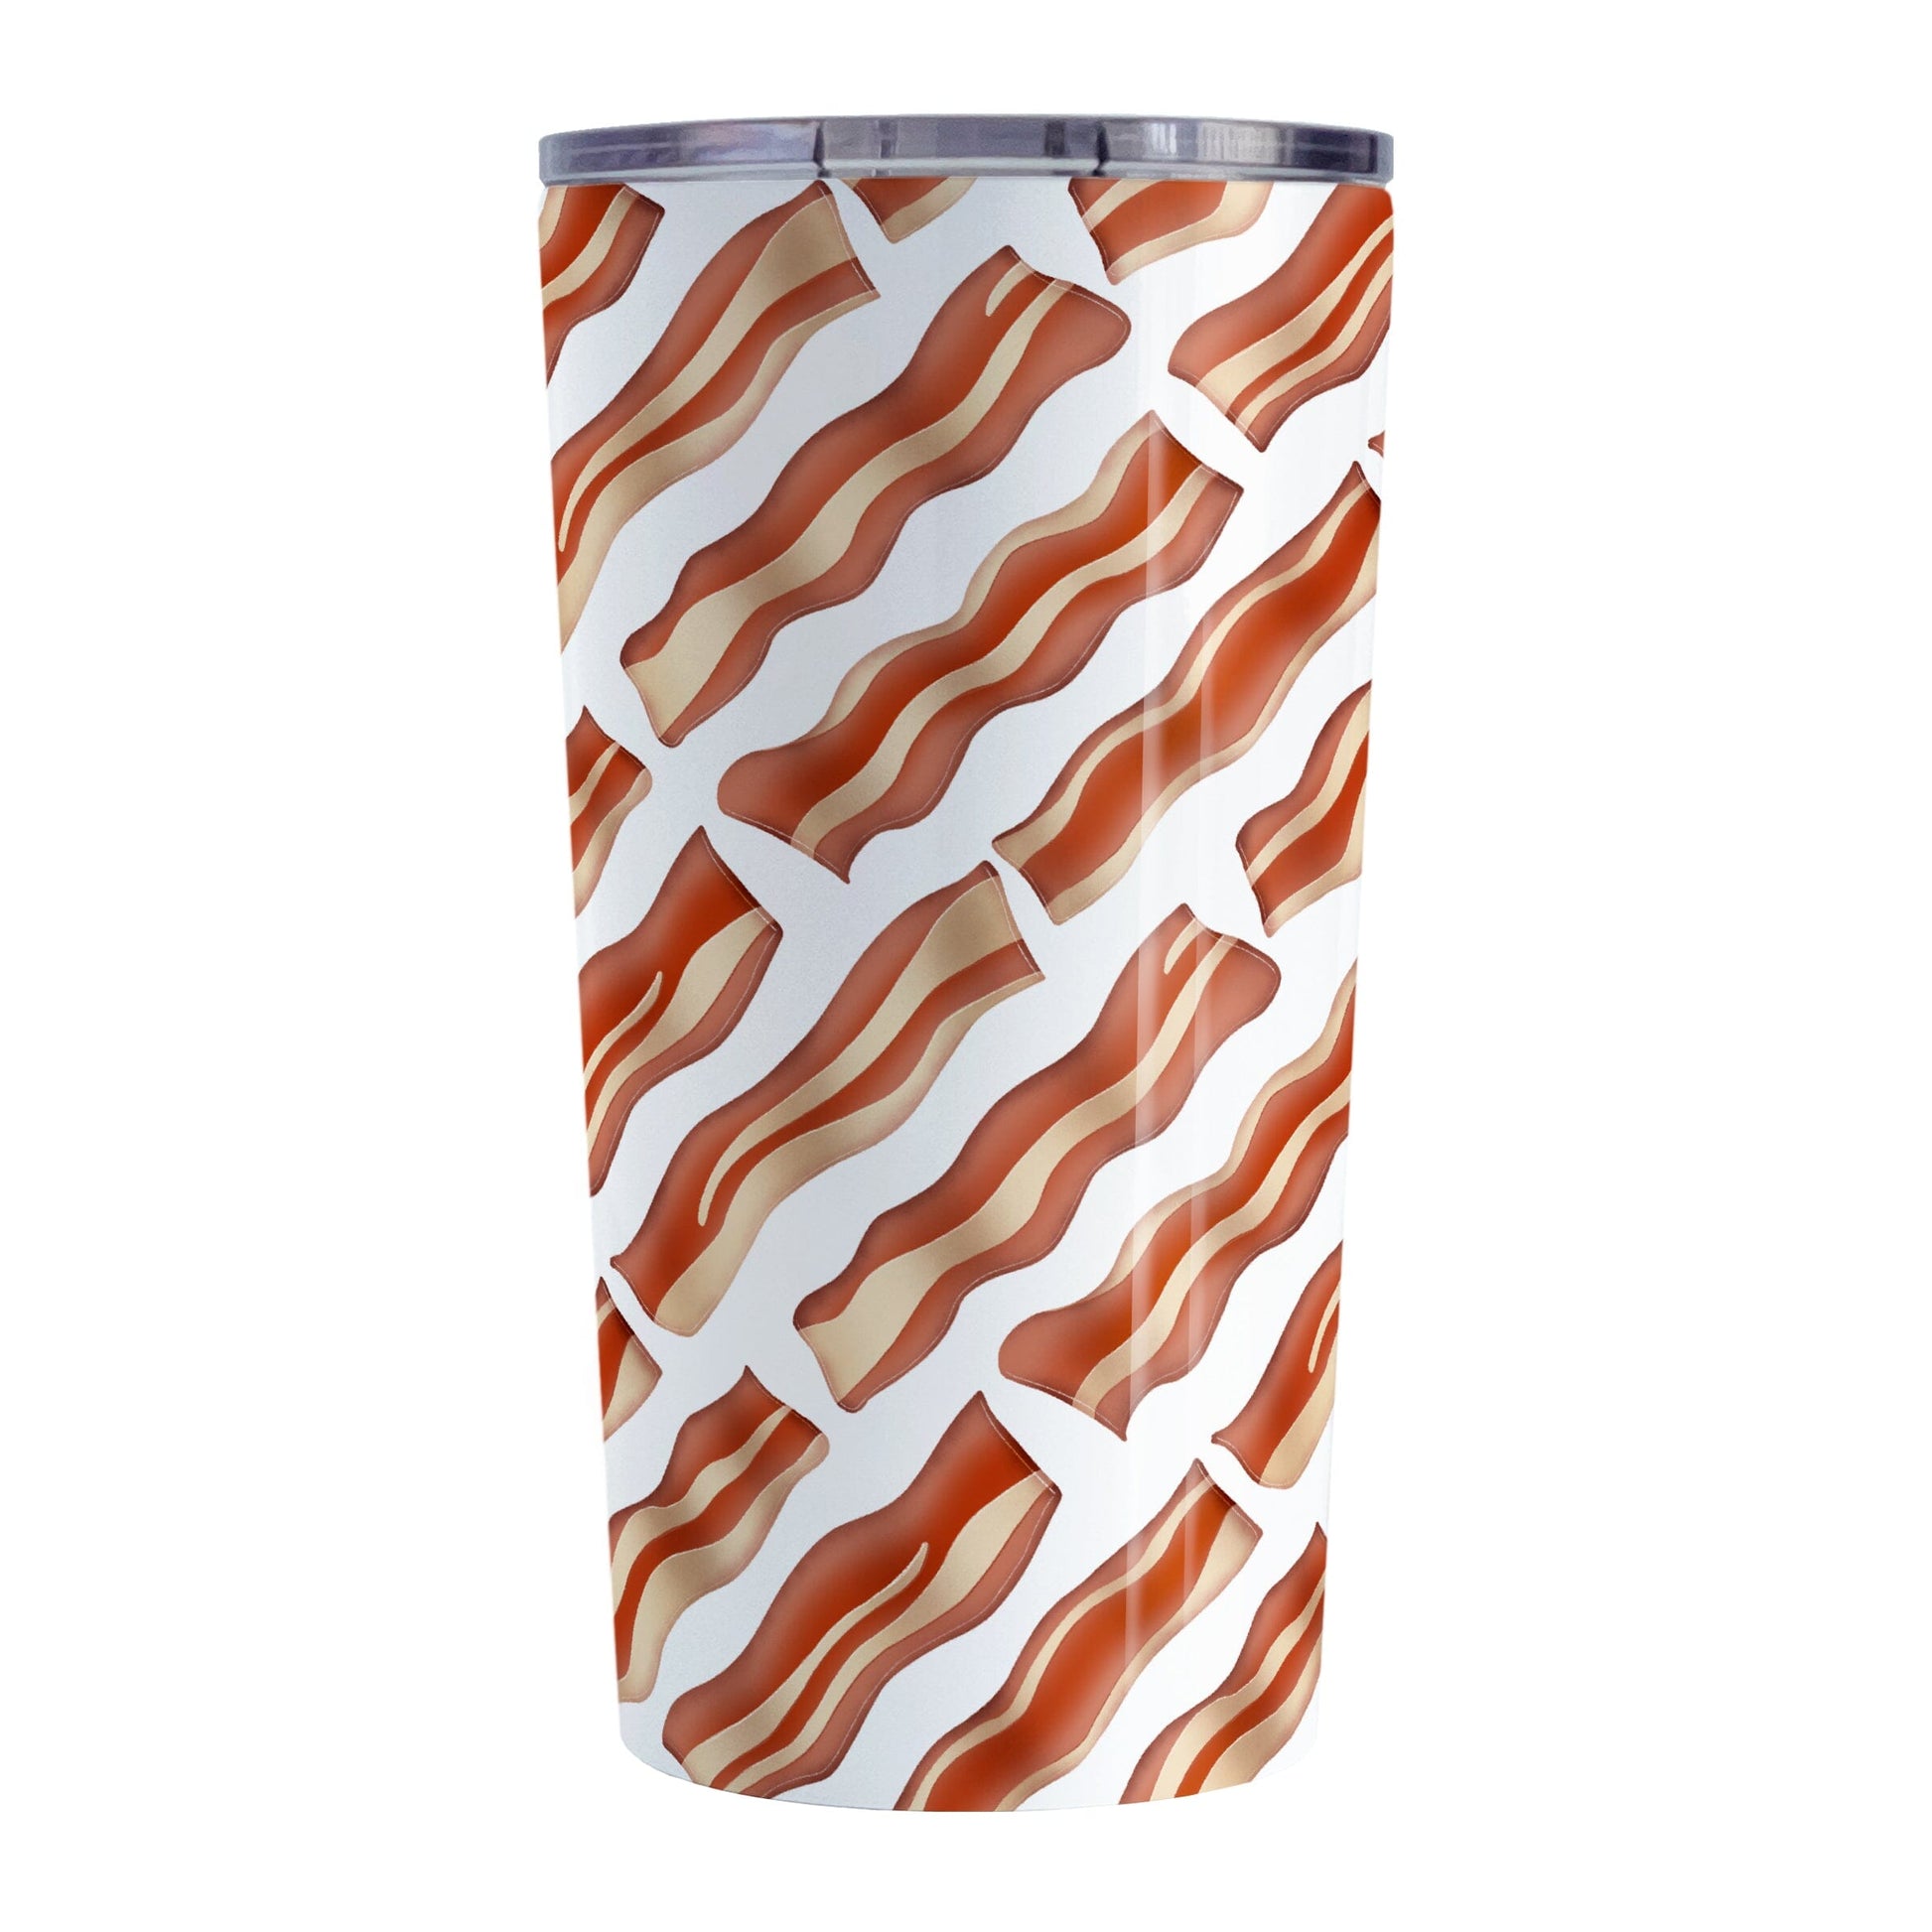 Bacon Pattern Tumbler Cup (20oz) at Amy's Coffee Mugs. A stainless steel tumbler cup designed with a diagonal pattern of bacon strips that wraps around the cup. It's perfect for anyone who loves bacon and wants a breakfast-themed cup with their morning meal or while they're at work.